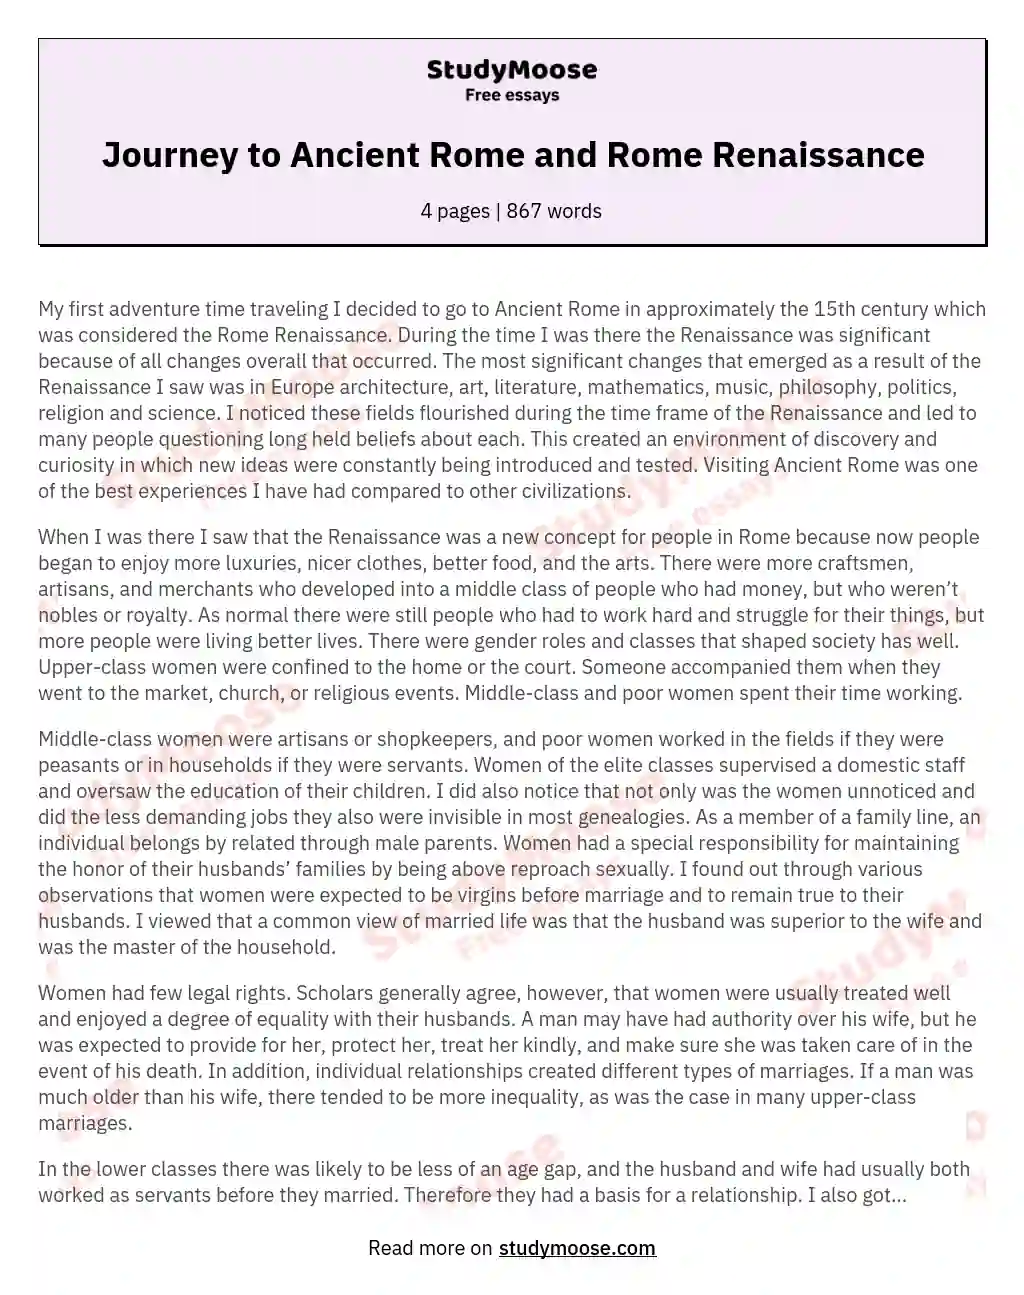 Journey to Ancient Rome and Rome Renaissance